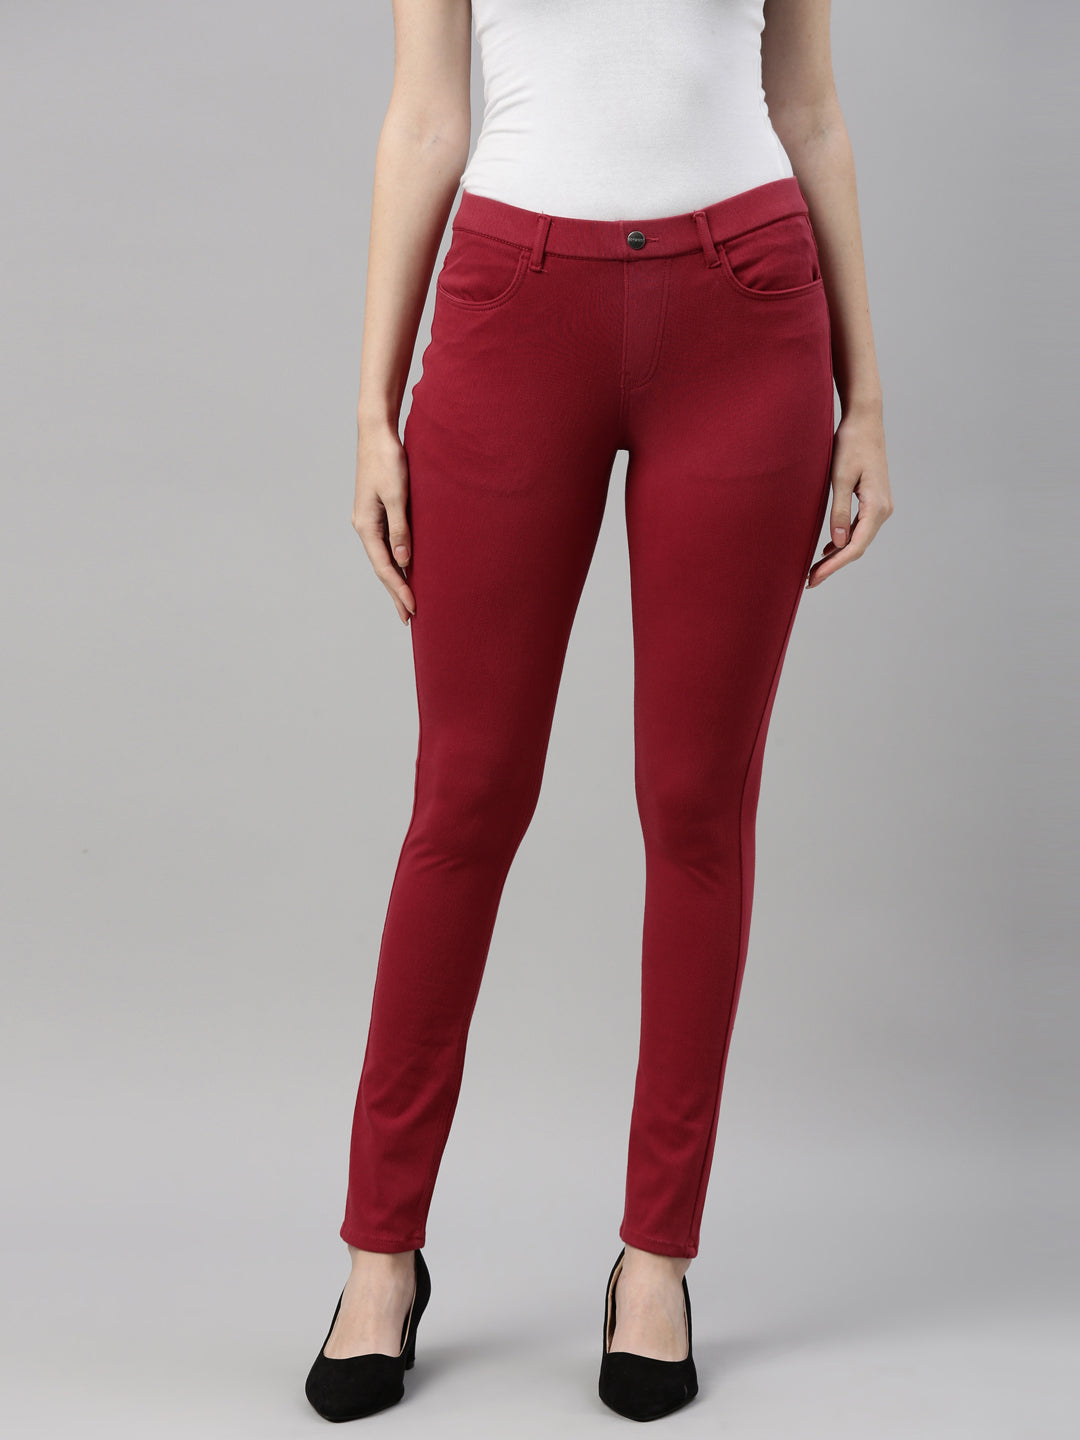 Women Solid Cherry Super Stretch Jeggings